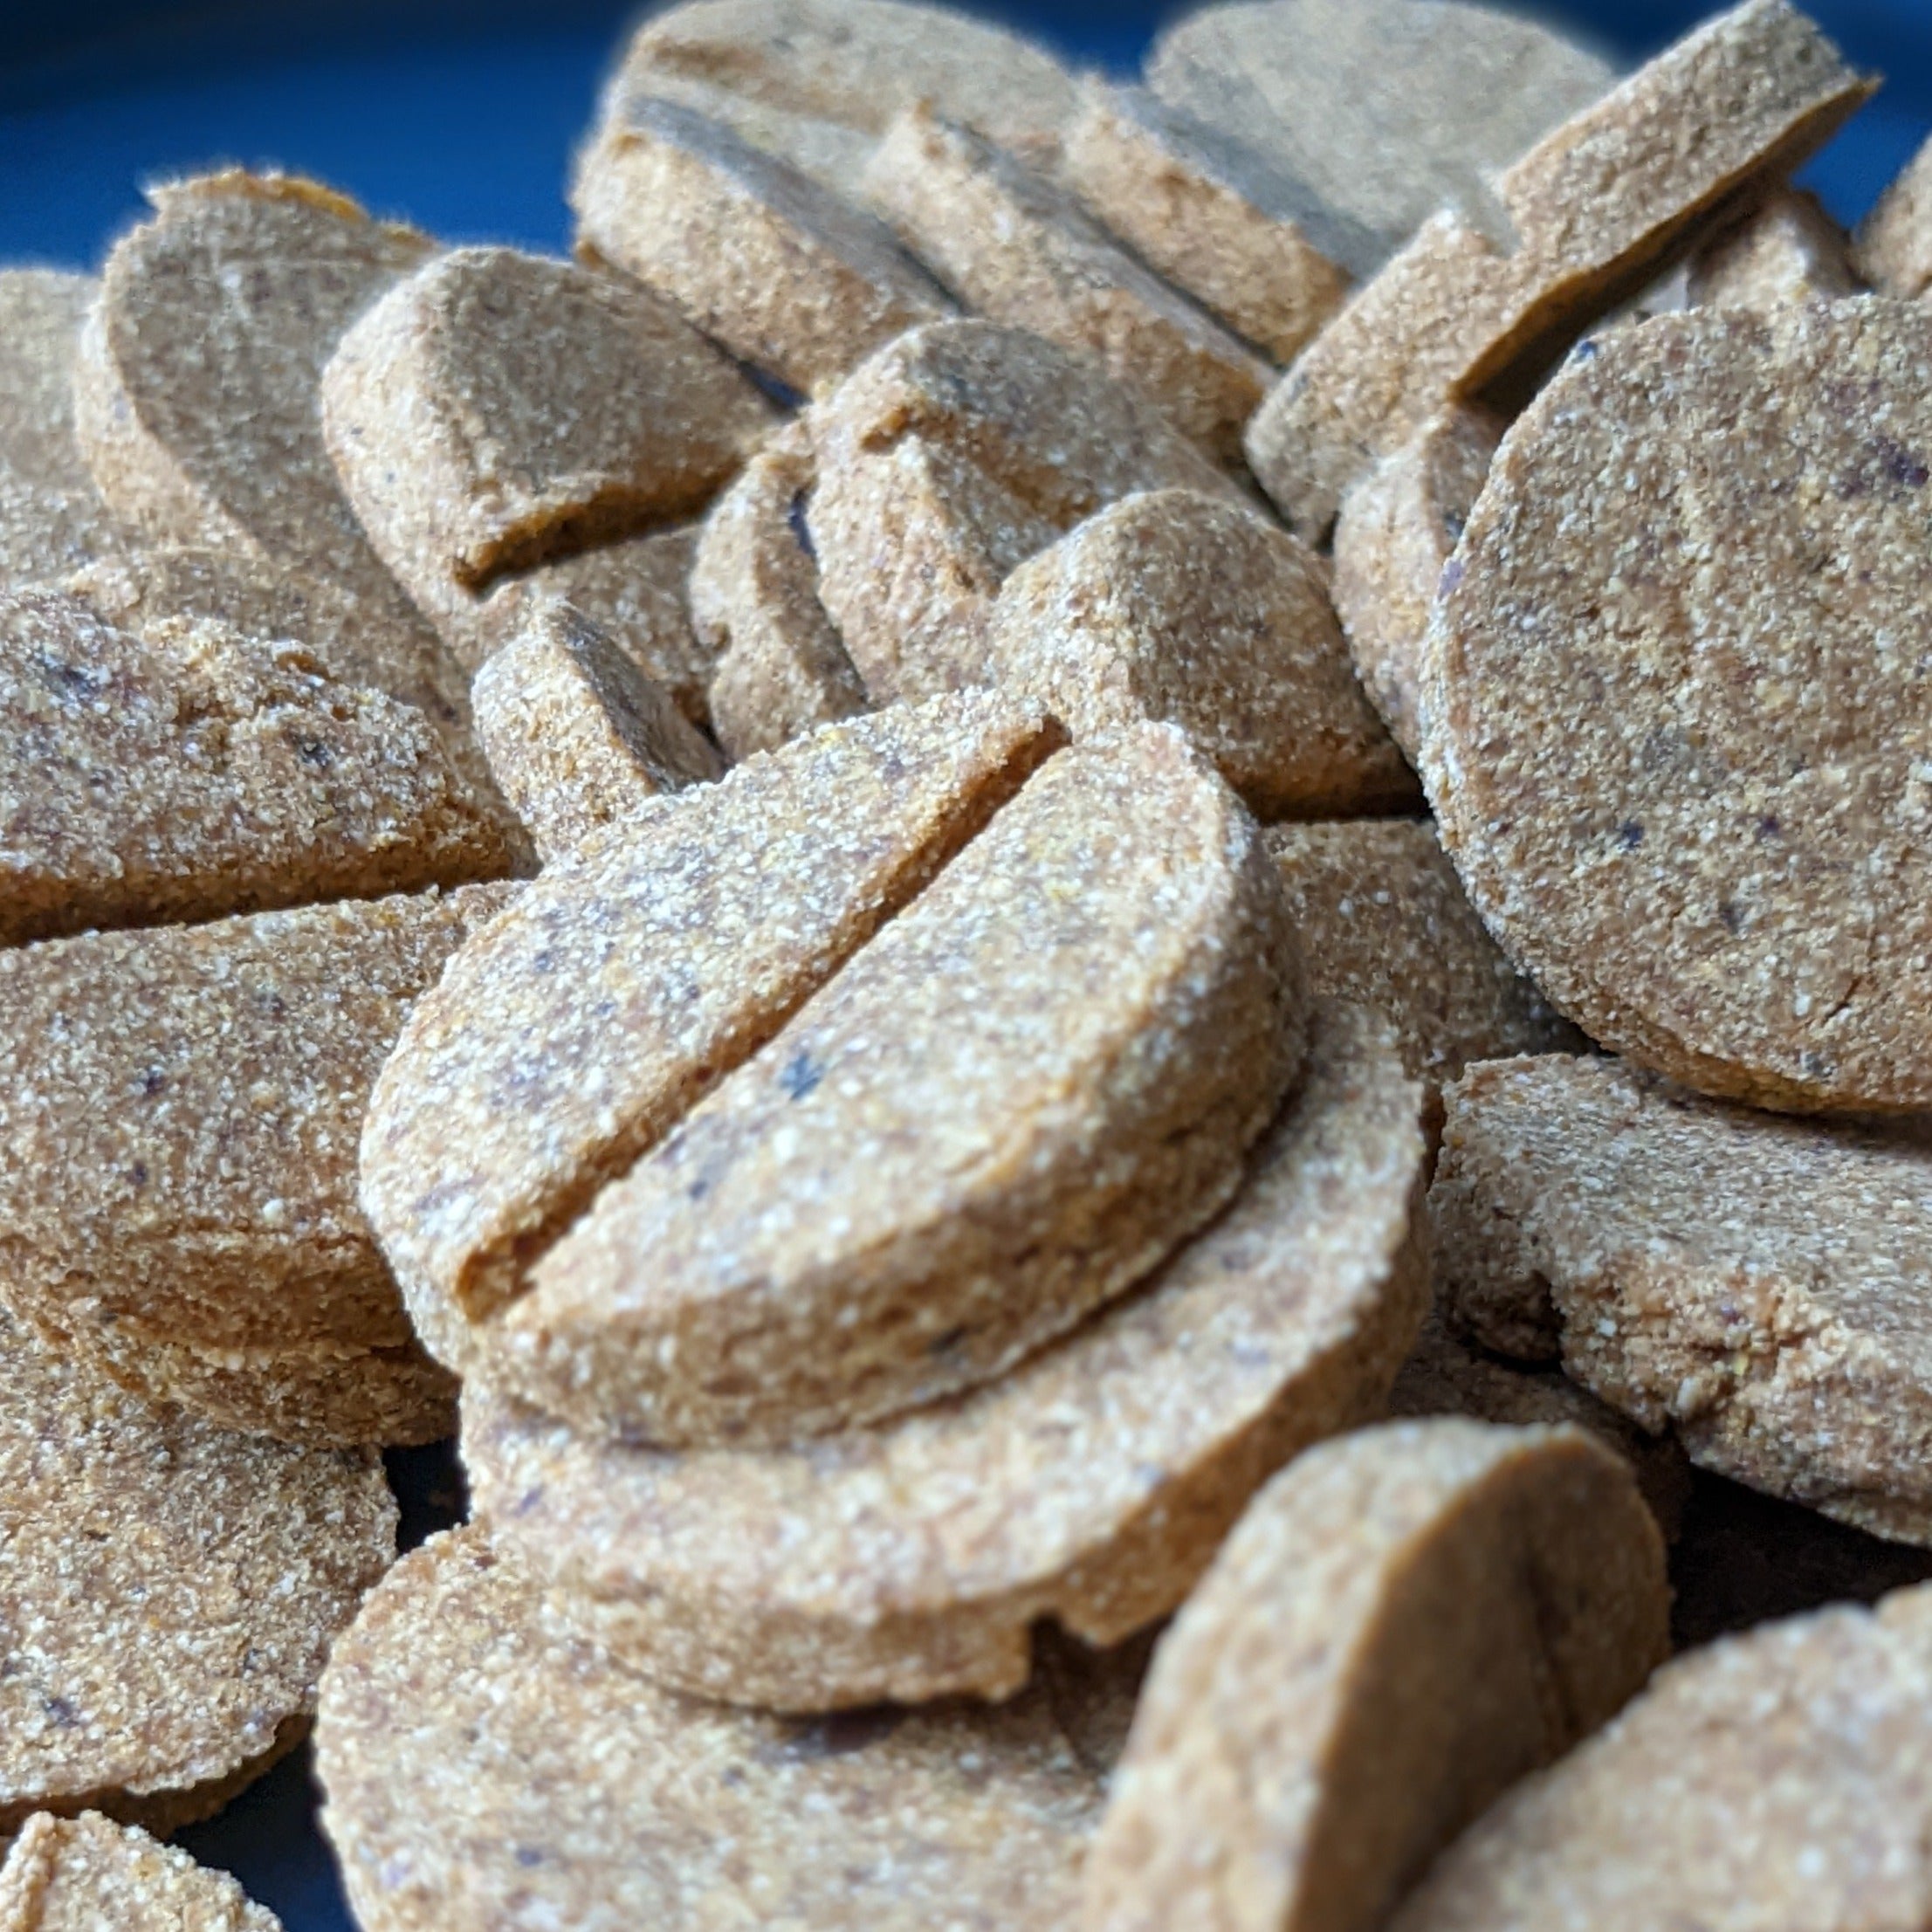 CHESTER'S PEANUT BUTTER AND GINGER DOG TREATS FOR CIRCULATORY SUPPORT